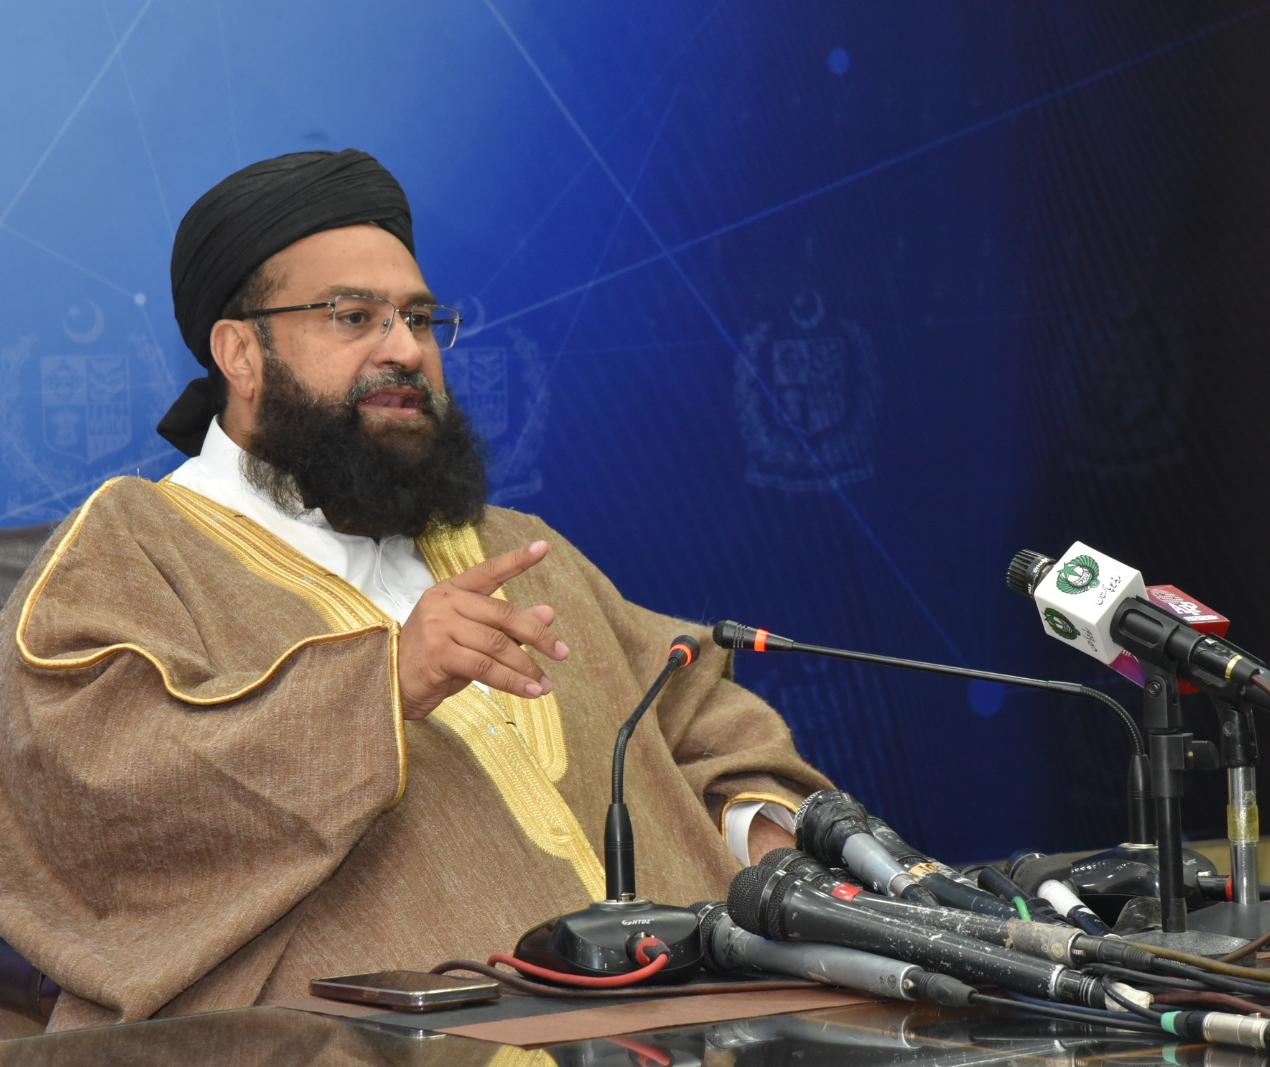 Pakistan poised for economic growth with strong support from Saudi Arabia: Ashrafi